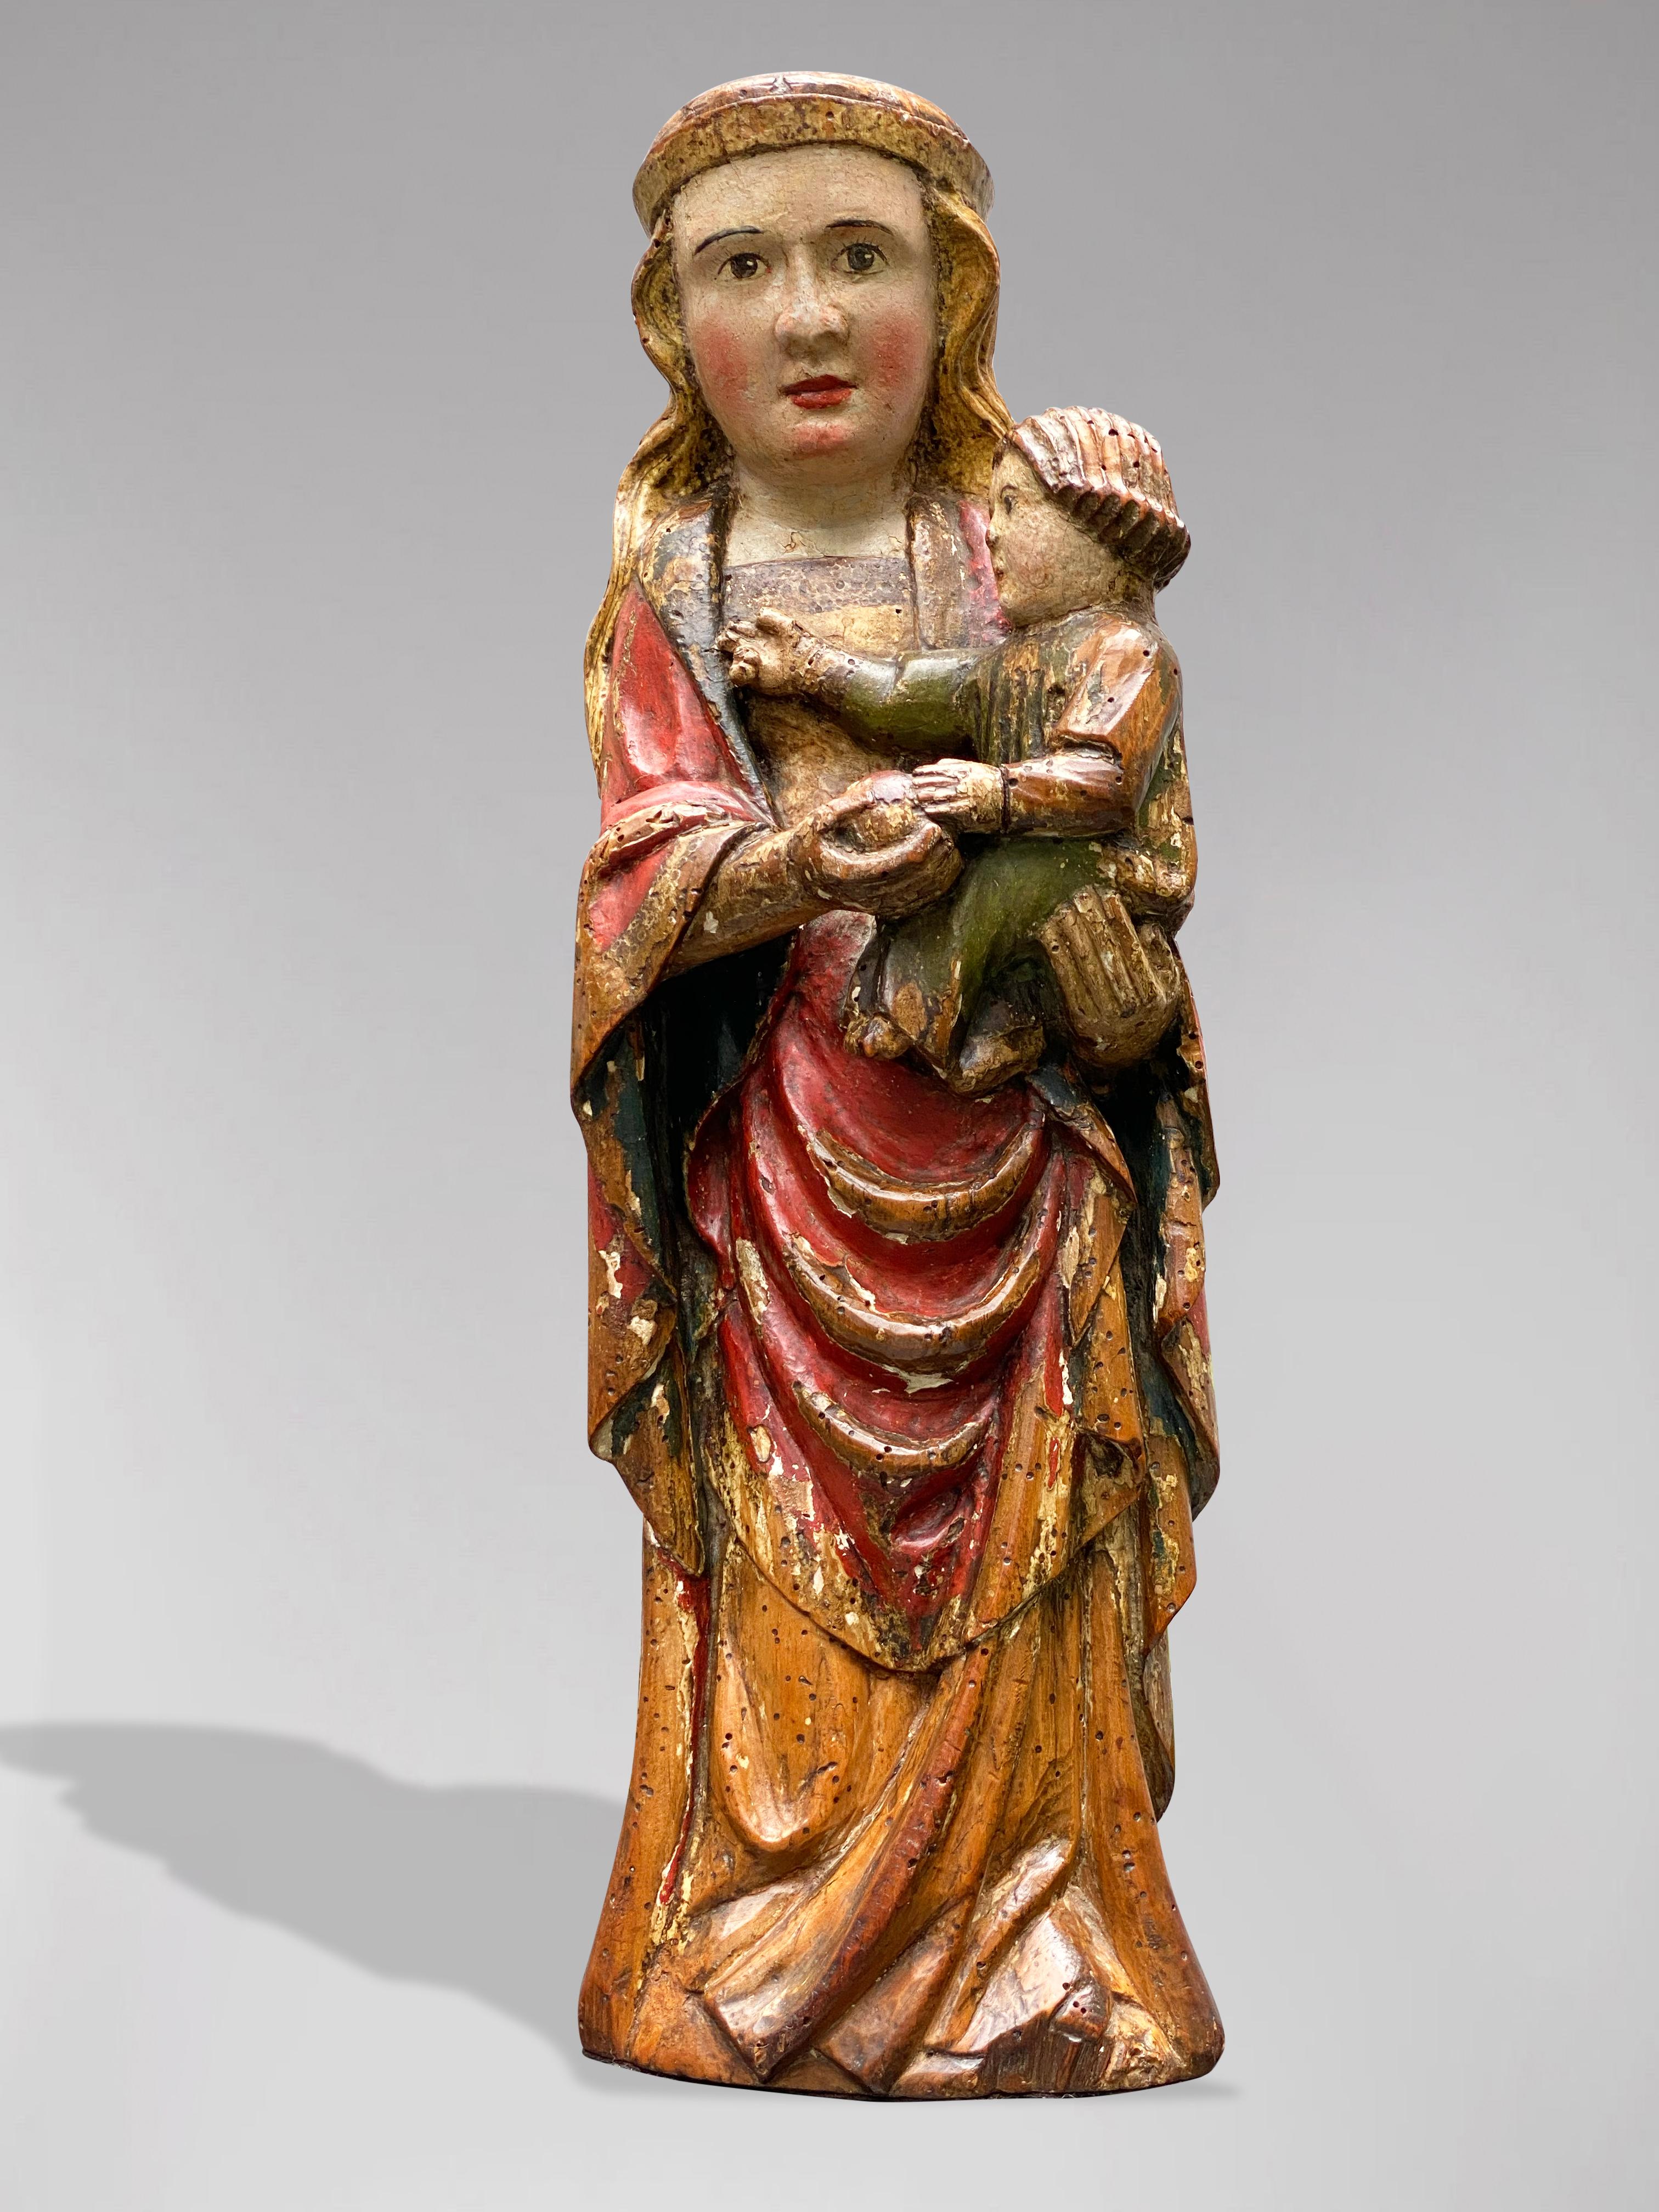 Unknown Figurative Sculpture - A Spanish Statue of the Virgin Mary with Child Jezus, circa 1600